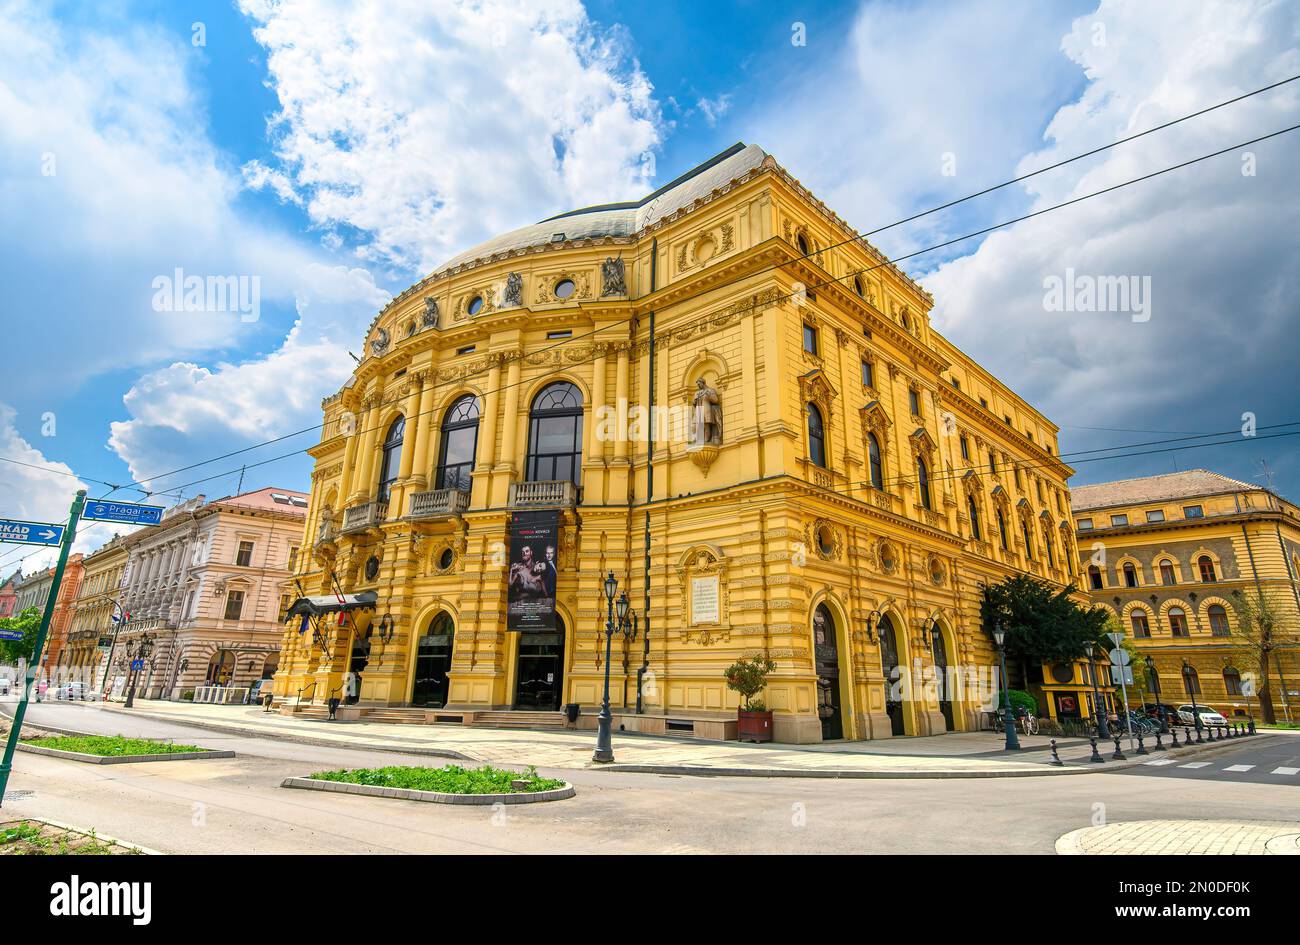 Szeged, Hungary. The National Theatre of Szeged is the main theatre of Szeged, Hungary. It was built in 1883 in Eclectic and Neo-baroque style. Stock Photo